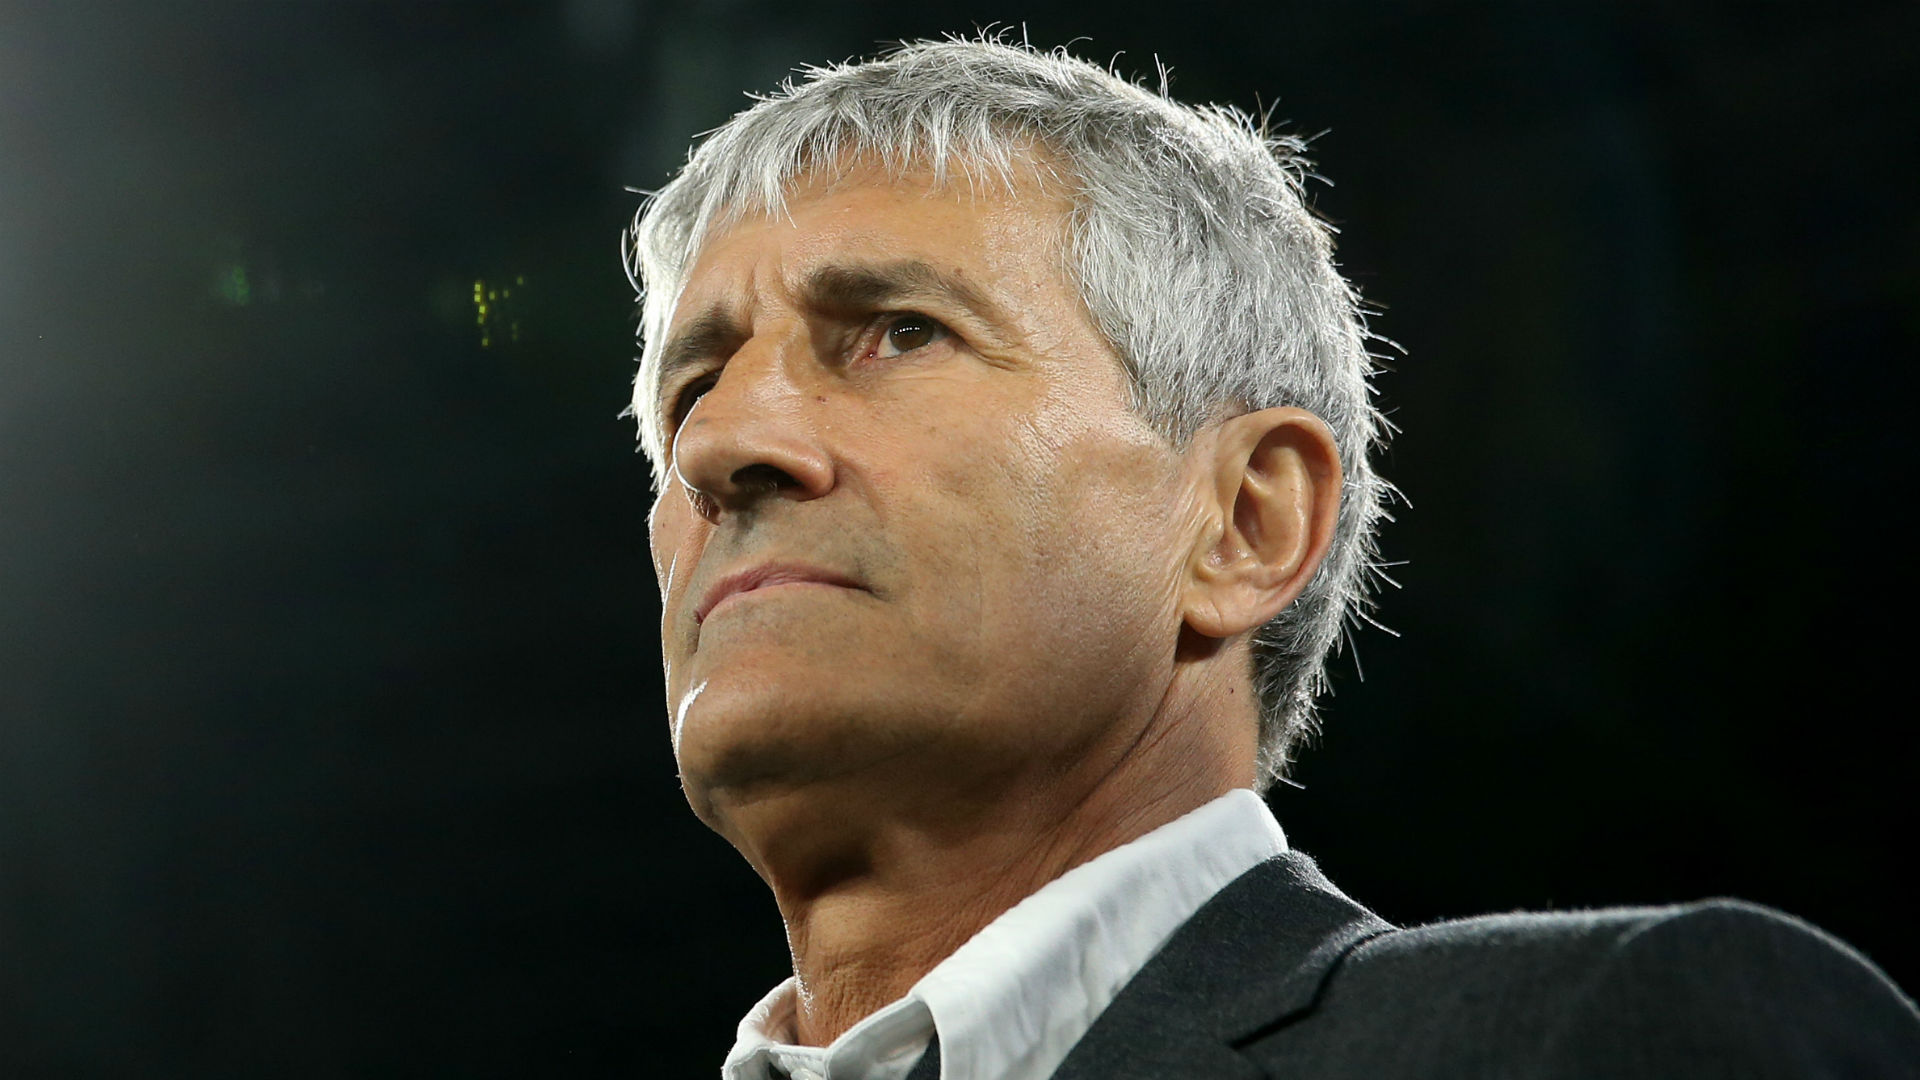 Barcelona head coach Quique Setien fended off more talk about his future ahead of a decisive encounter with Napoli.